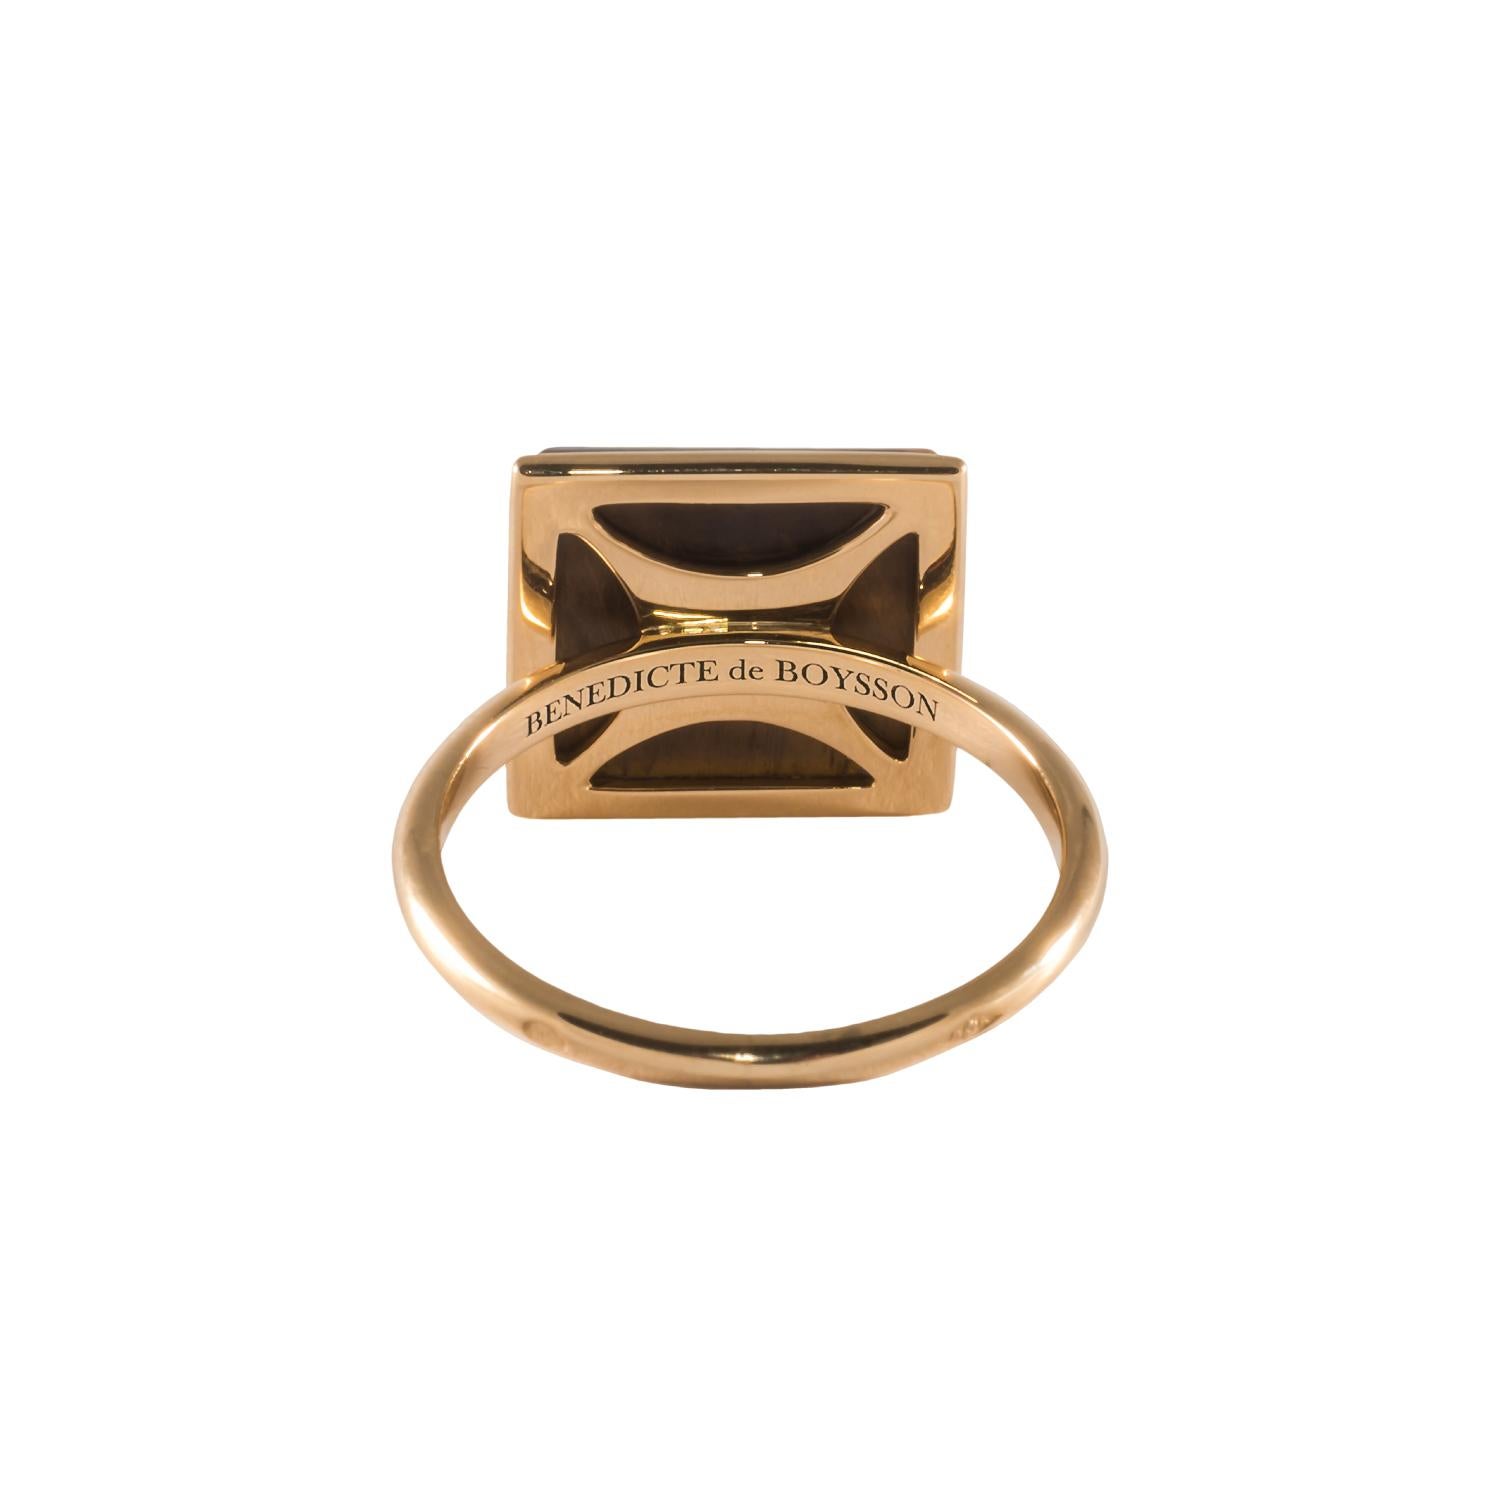 18 Carat Yellow Gold Ring with Tiger Eyes Pyramid Shape 12 mm (0.47 inches). HAND CARVED STONES made from a specific unique designed. HANDCRAFTED IN FRANCE.
The Designer, Bénédicte, decided to Produce all her Creations in her Country of Origin,